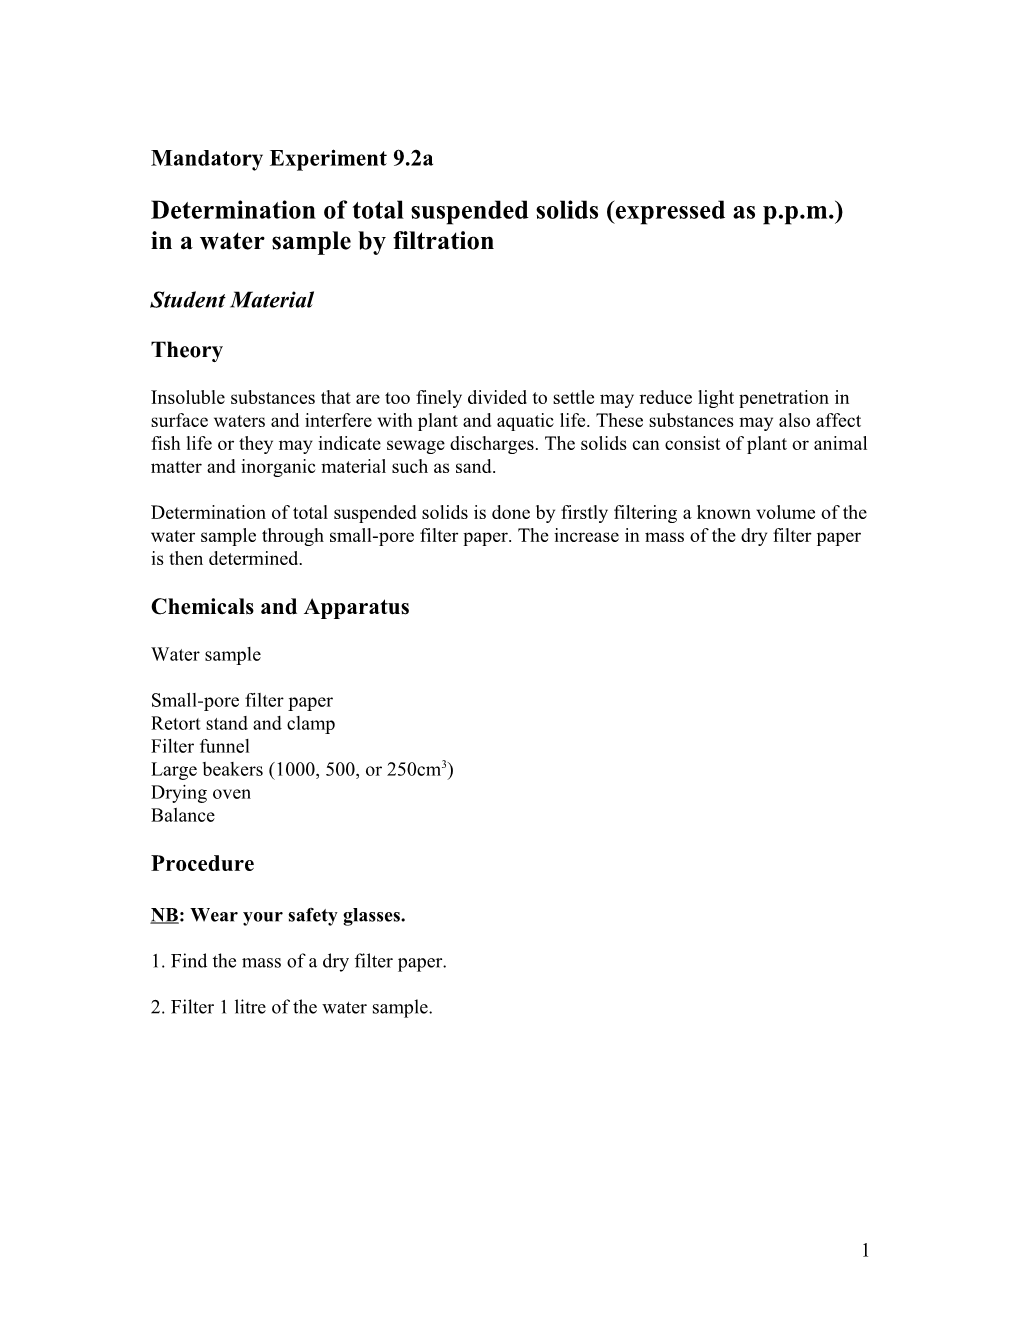 Determination of Total Suspended Solids (Expressed As P.P.M.) in a Water Sample by Filtration